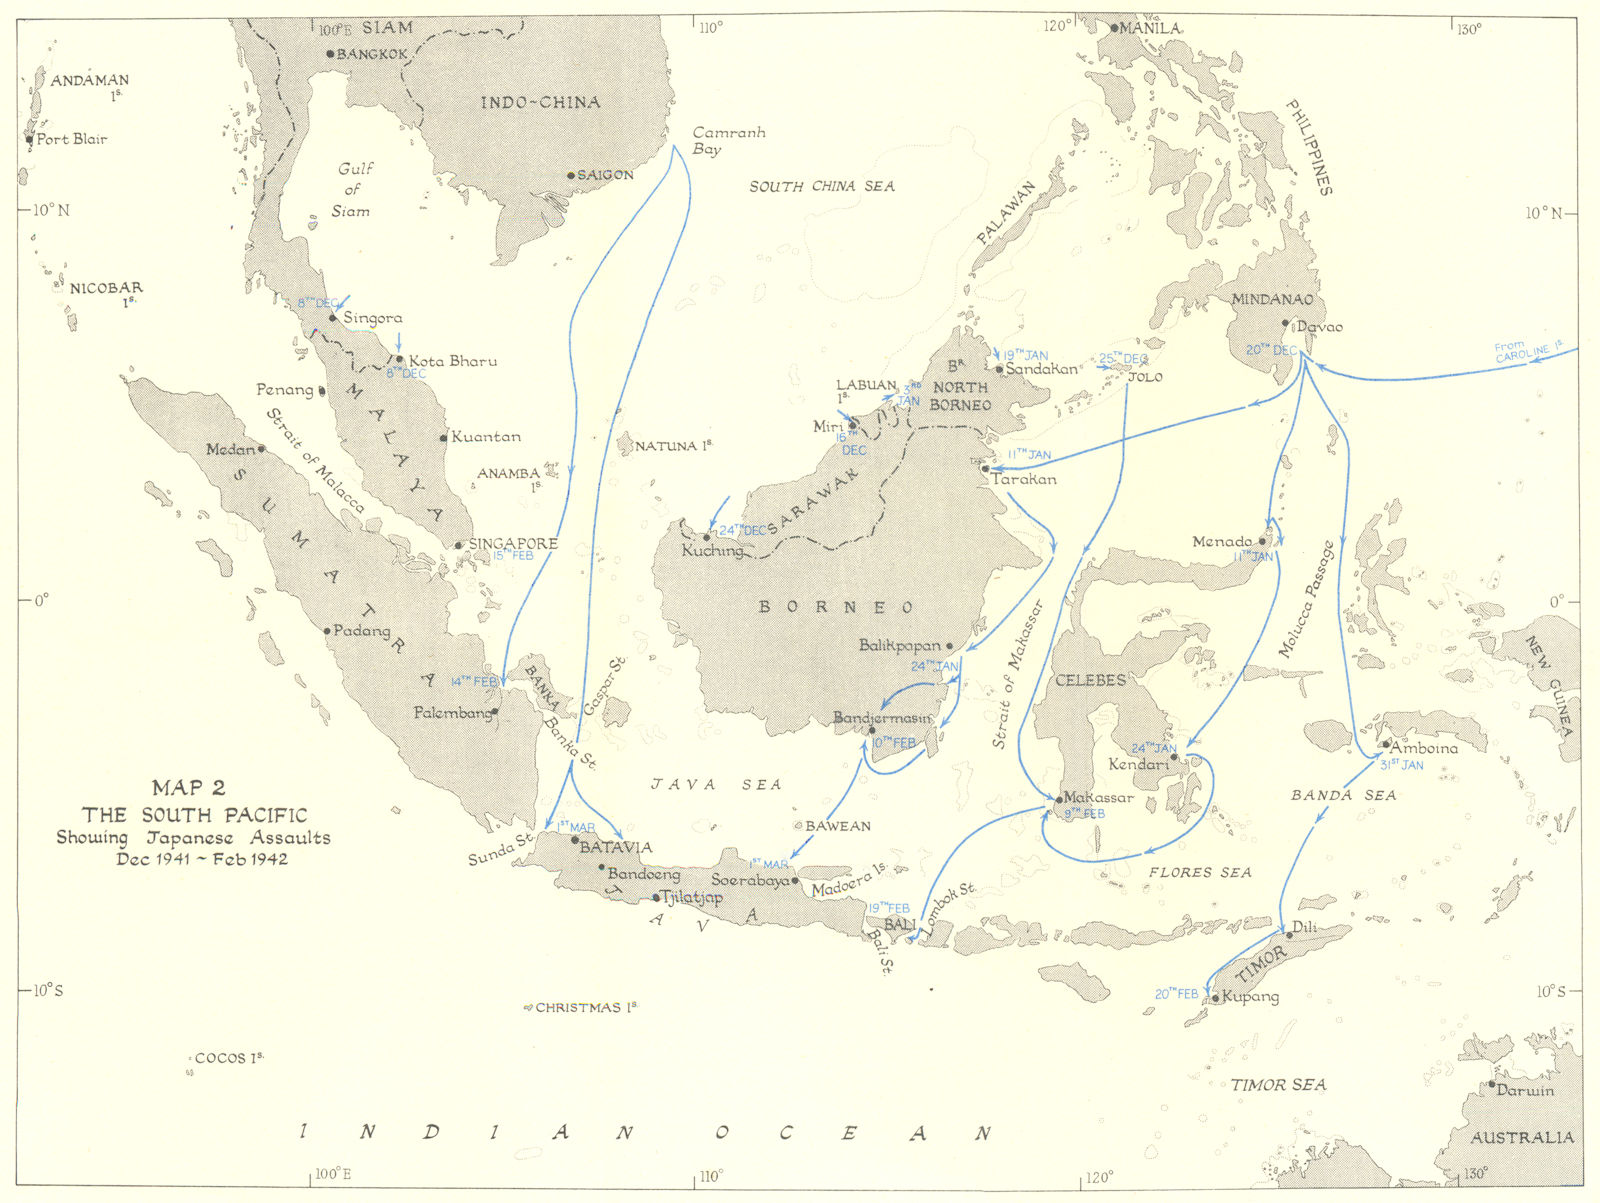 INDONESIA. South Pacific showing Japanese assaults Dec 1941-Feb 1942 1956 map